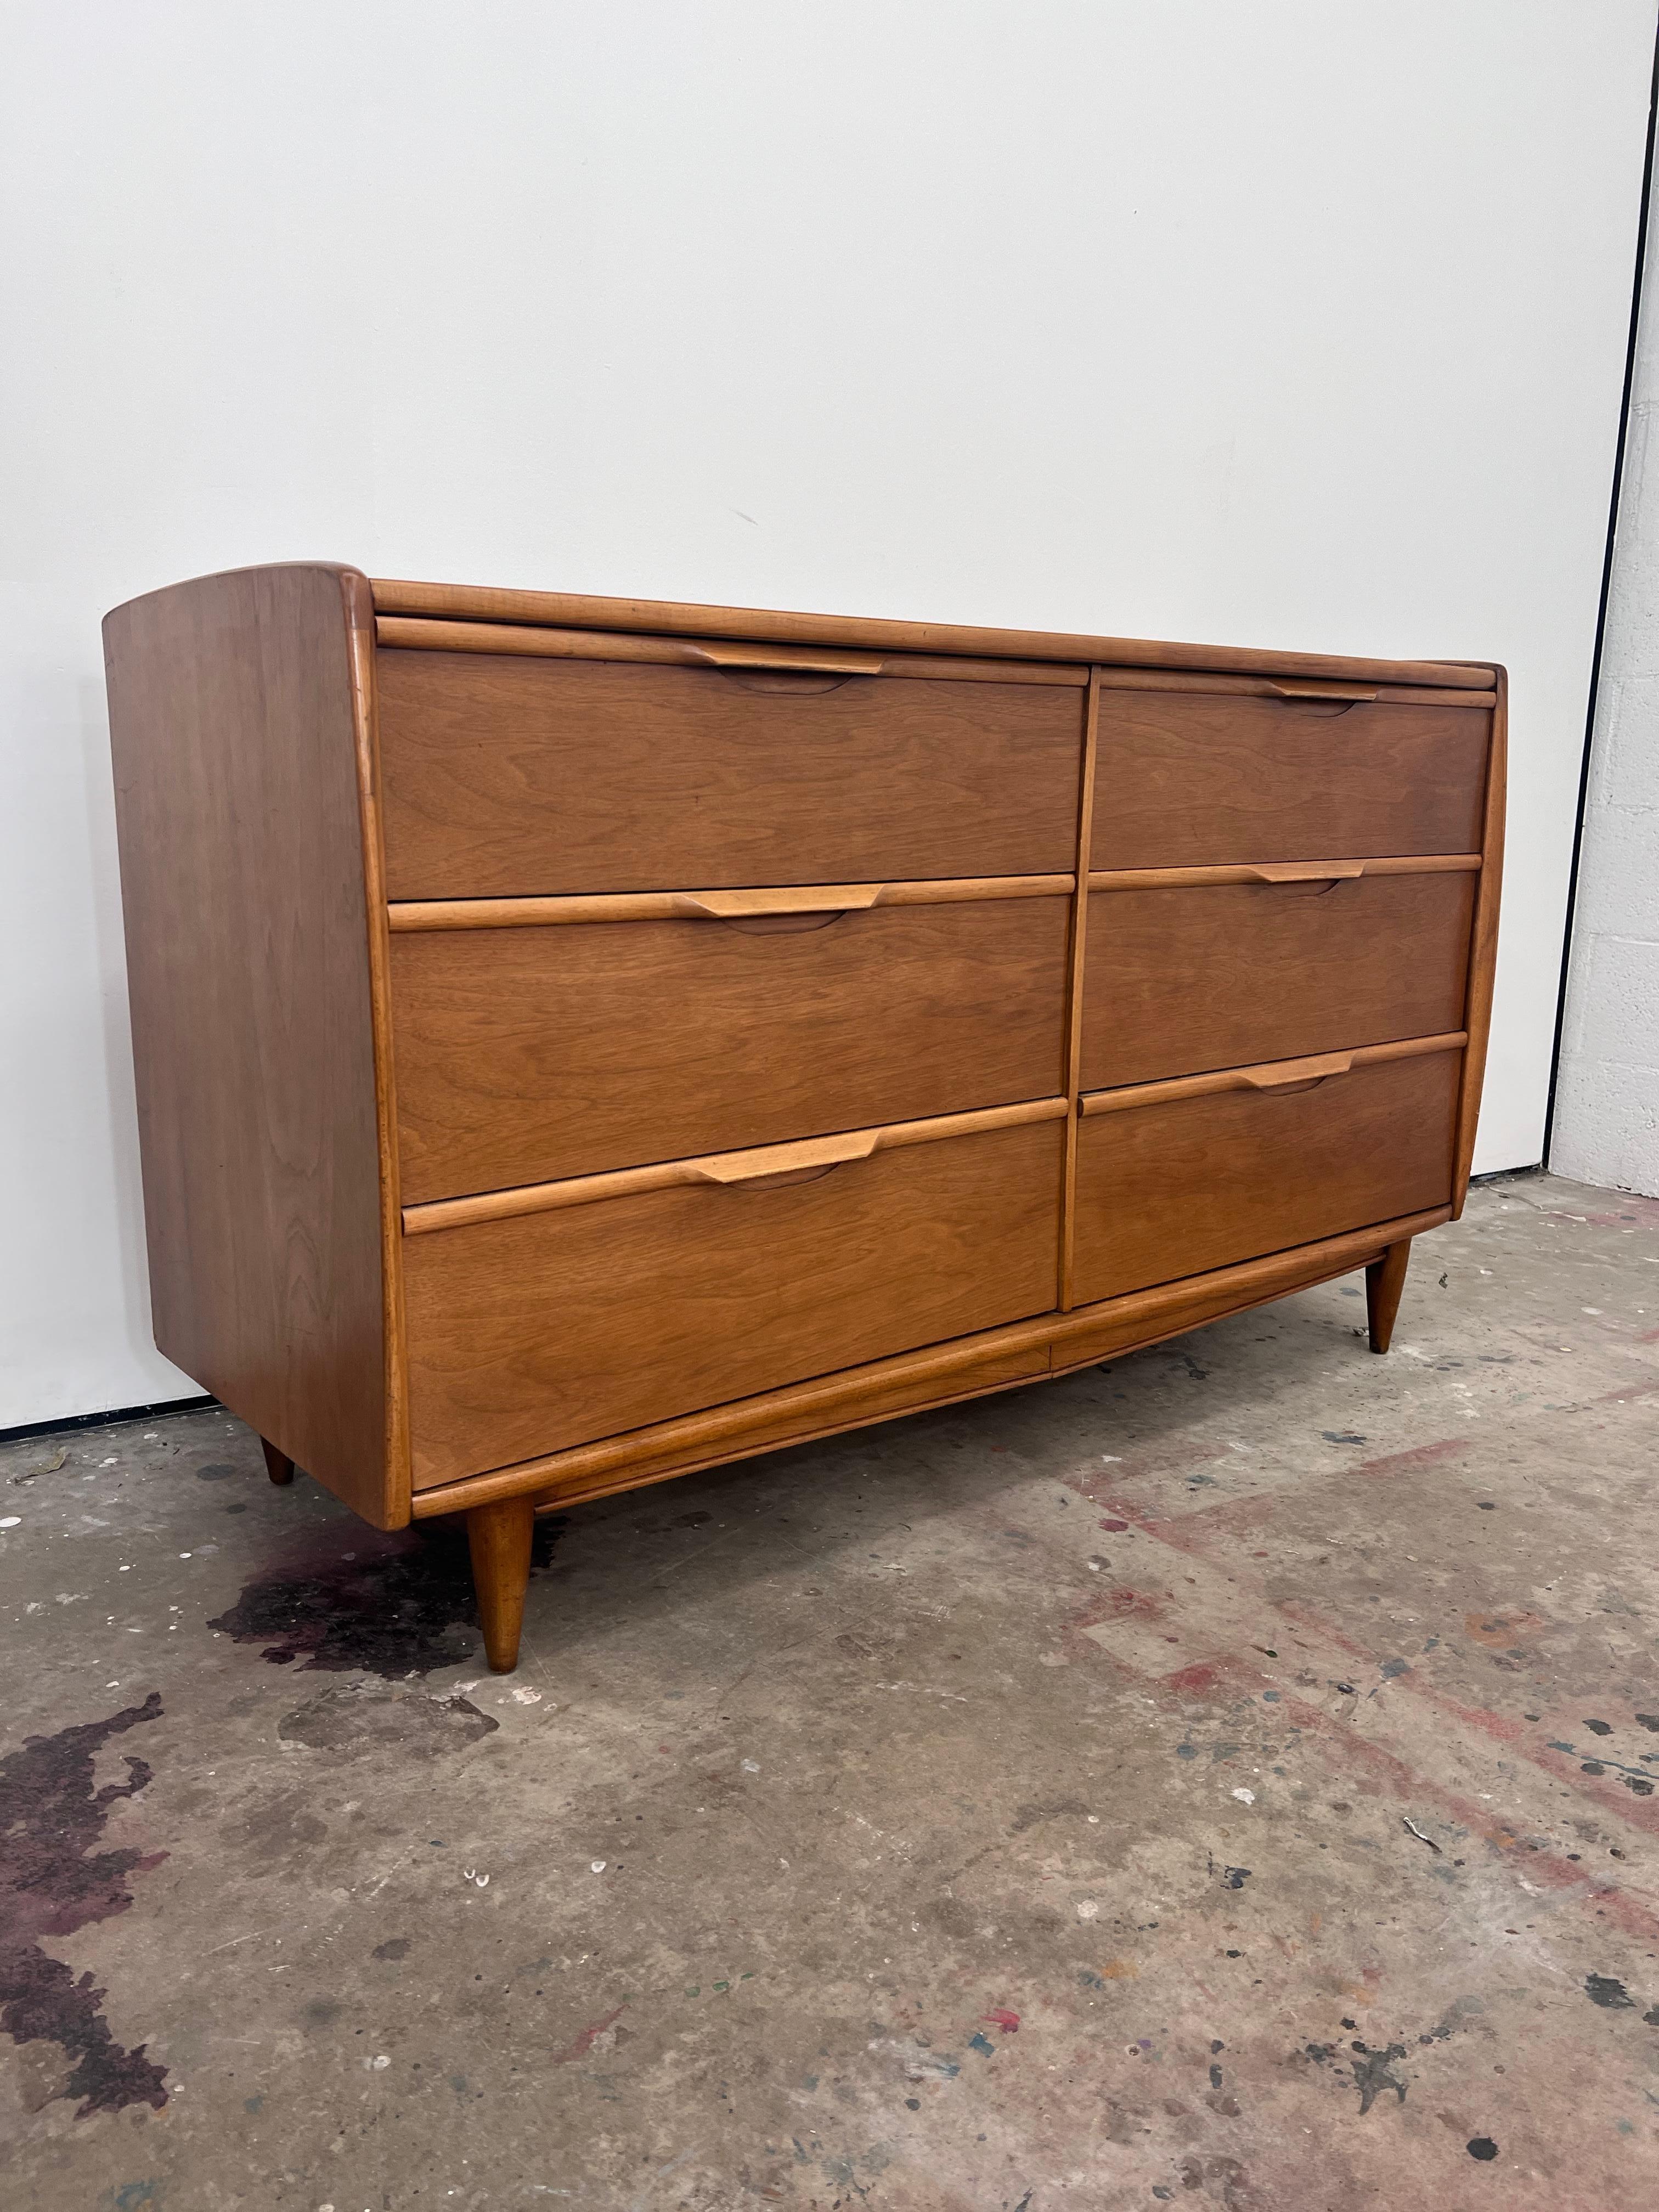 Petit 1960s Kent Coffey walnut 6 drawer dresser from their  “The Cadence” line. 

The original mirror is also Included. 

Dresser: 
54” long 
20” deep 
31.75” H 

Mirror: 
40” long
30” tall
 2” deep 
 Drawers feature sleek sculpted pulls. The piece